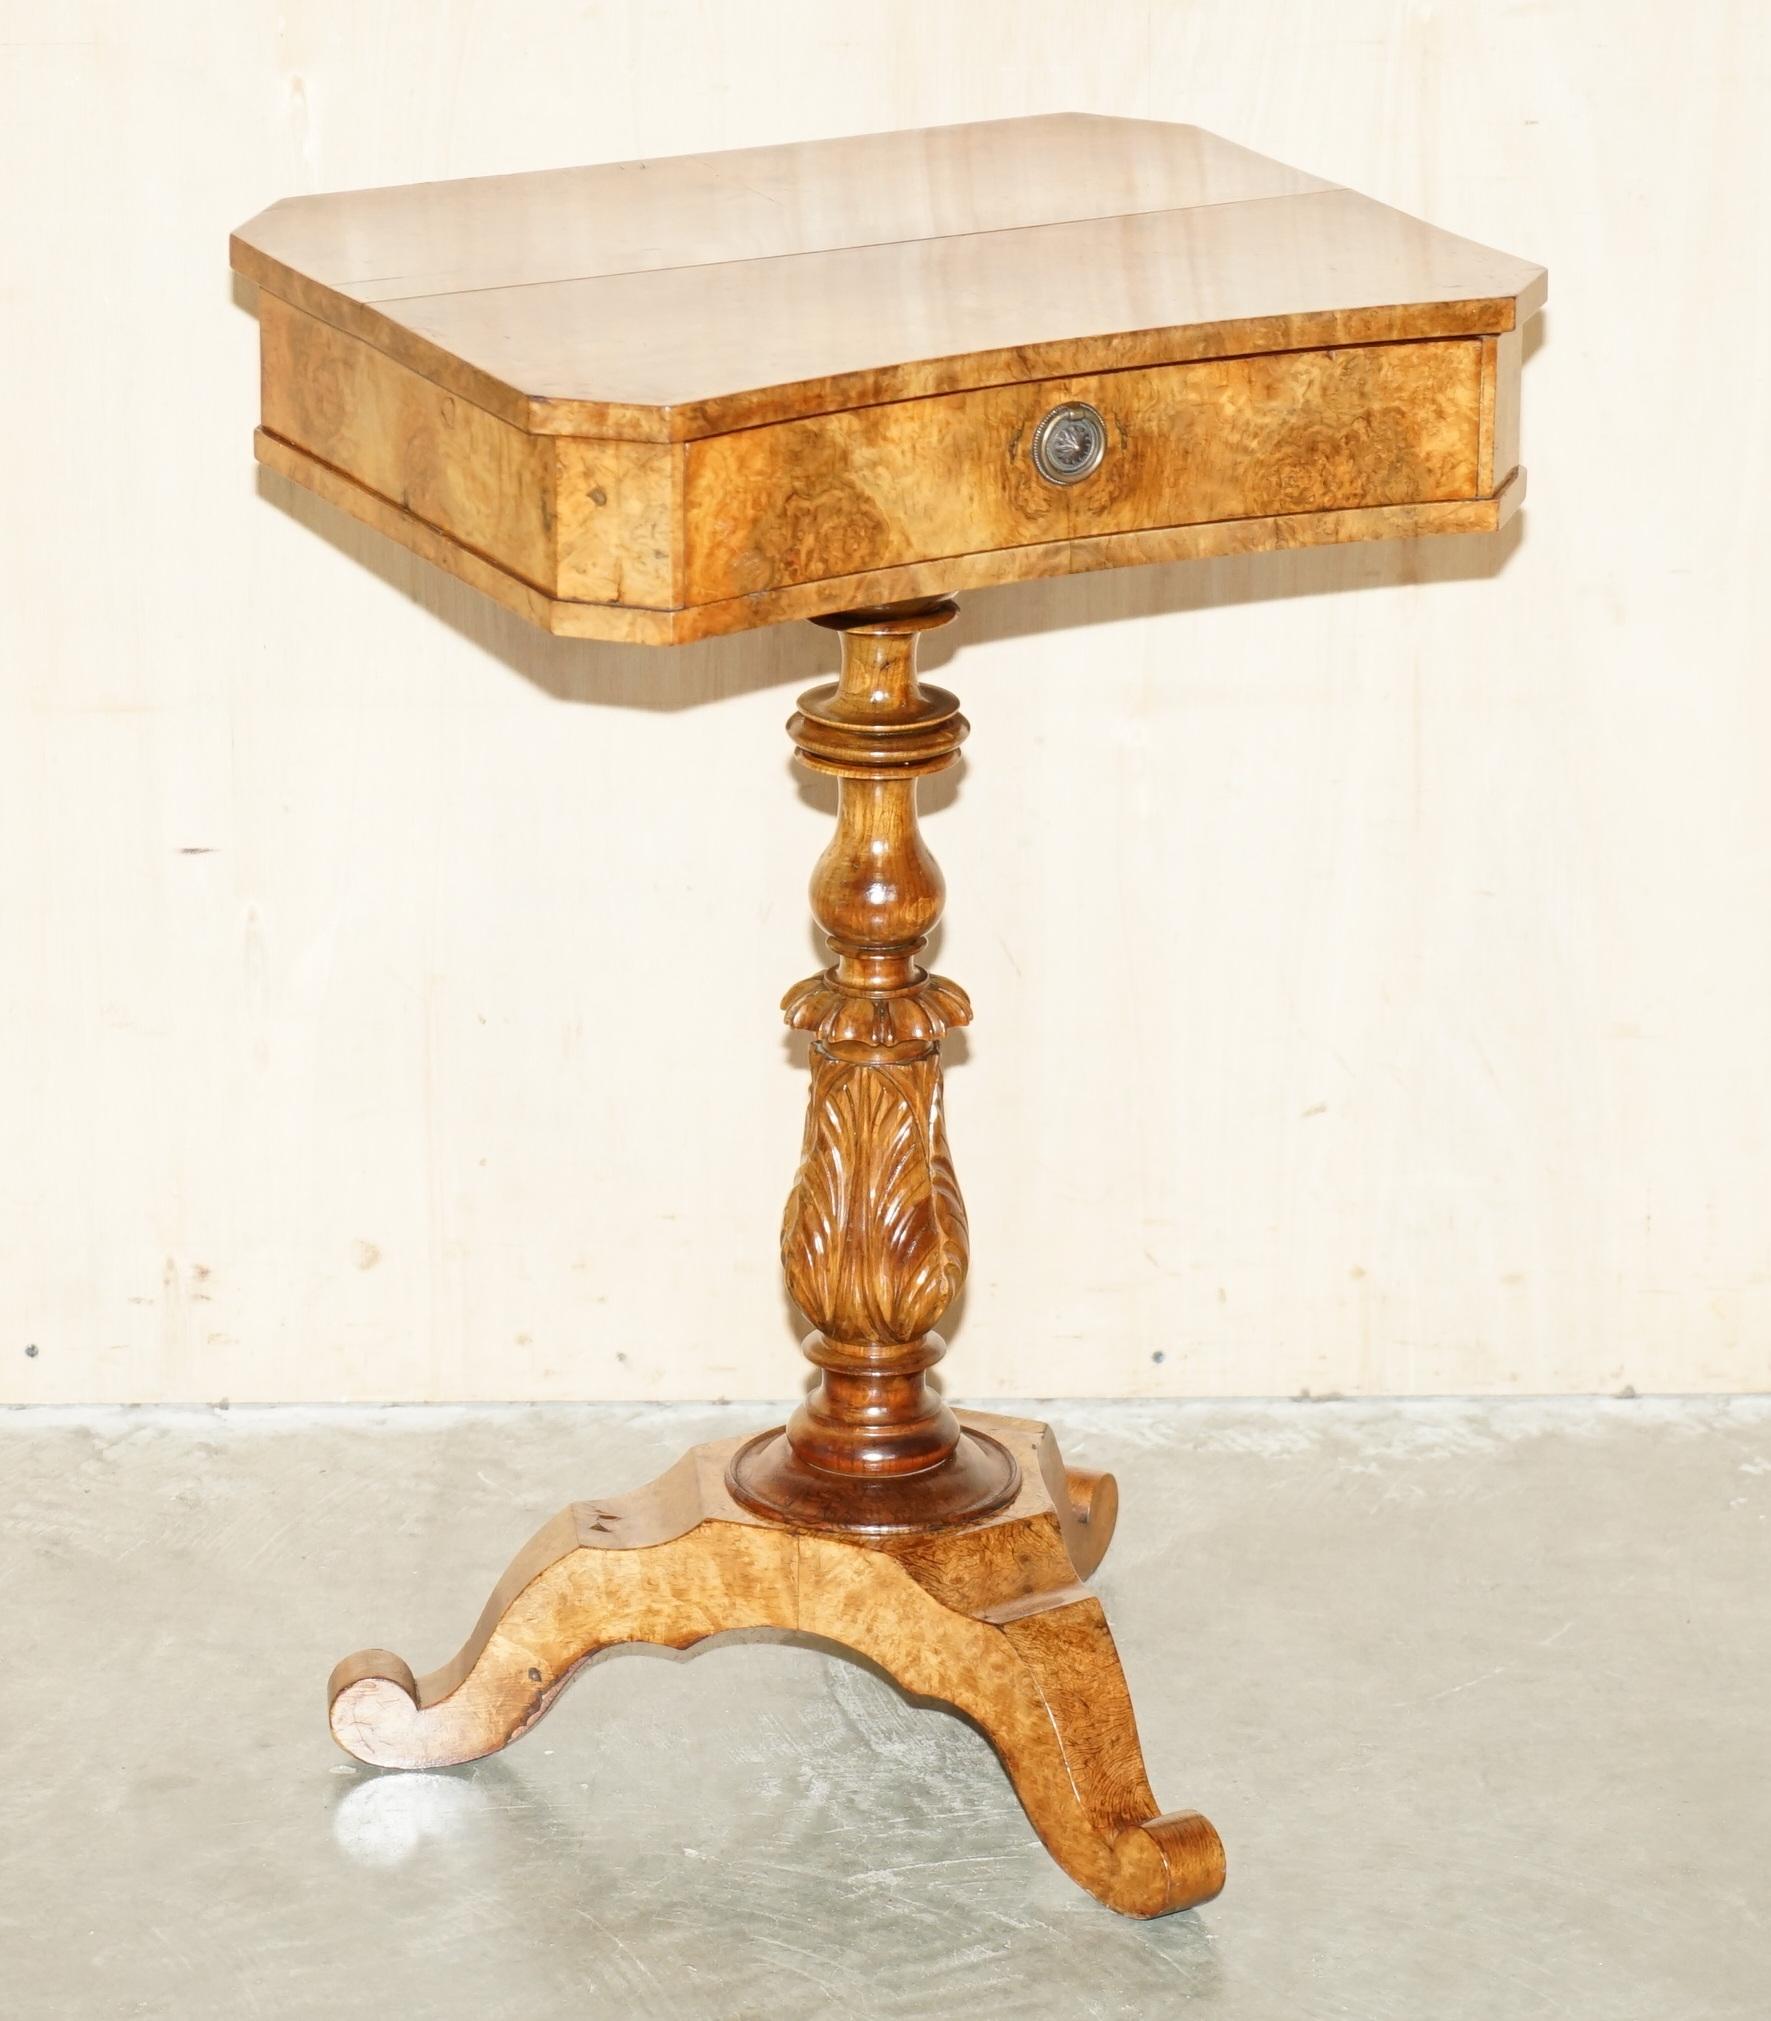 Royal House Antiques

Royal House Antiques is delighted to offer for sale this stunning, super decorative Antique circa 1830 William IV sewing or work table of the finest quality 

Please note the delivery fee listed is just a guide, it covers